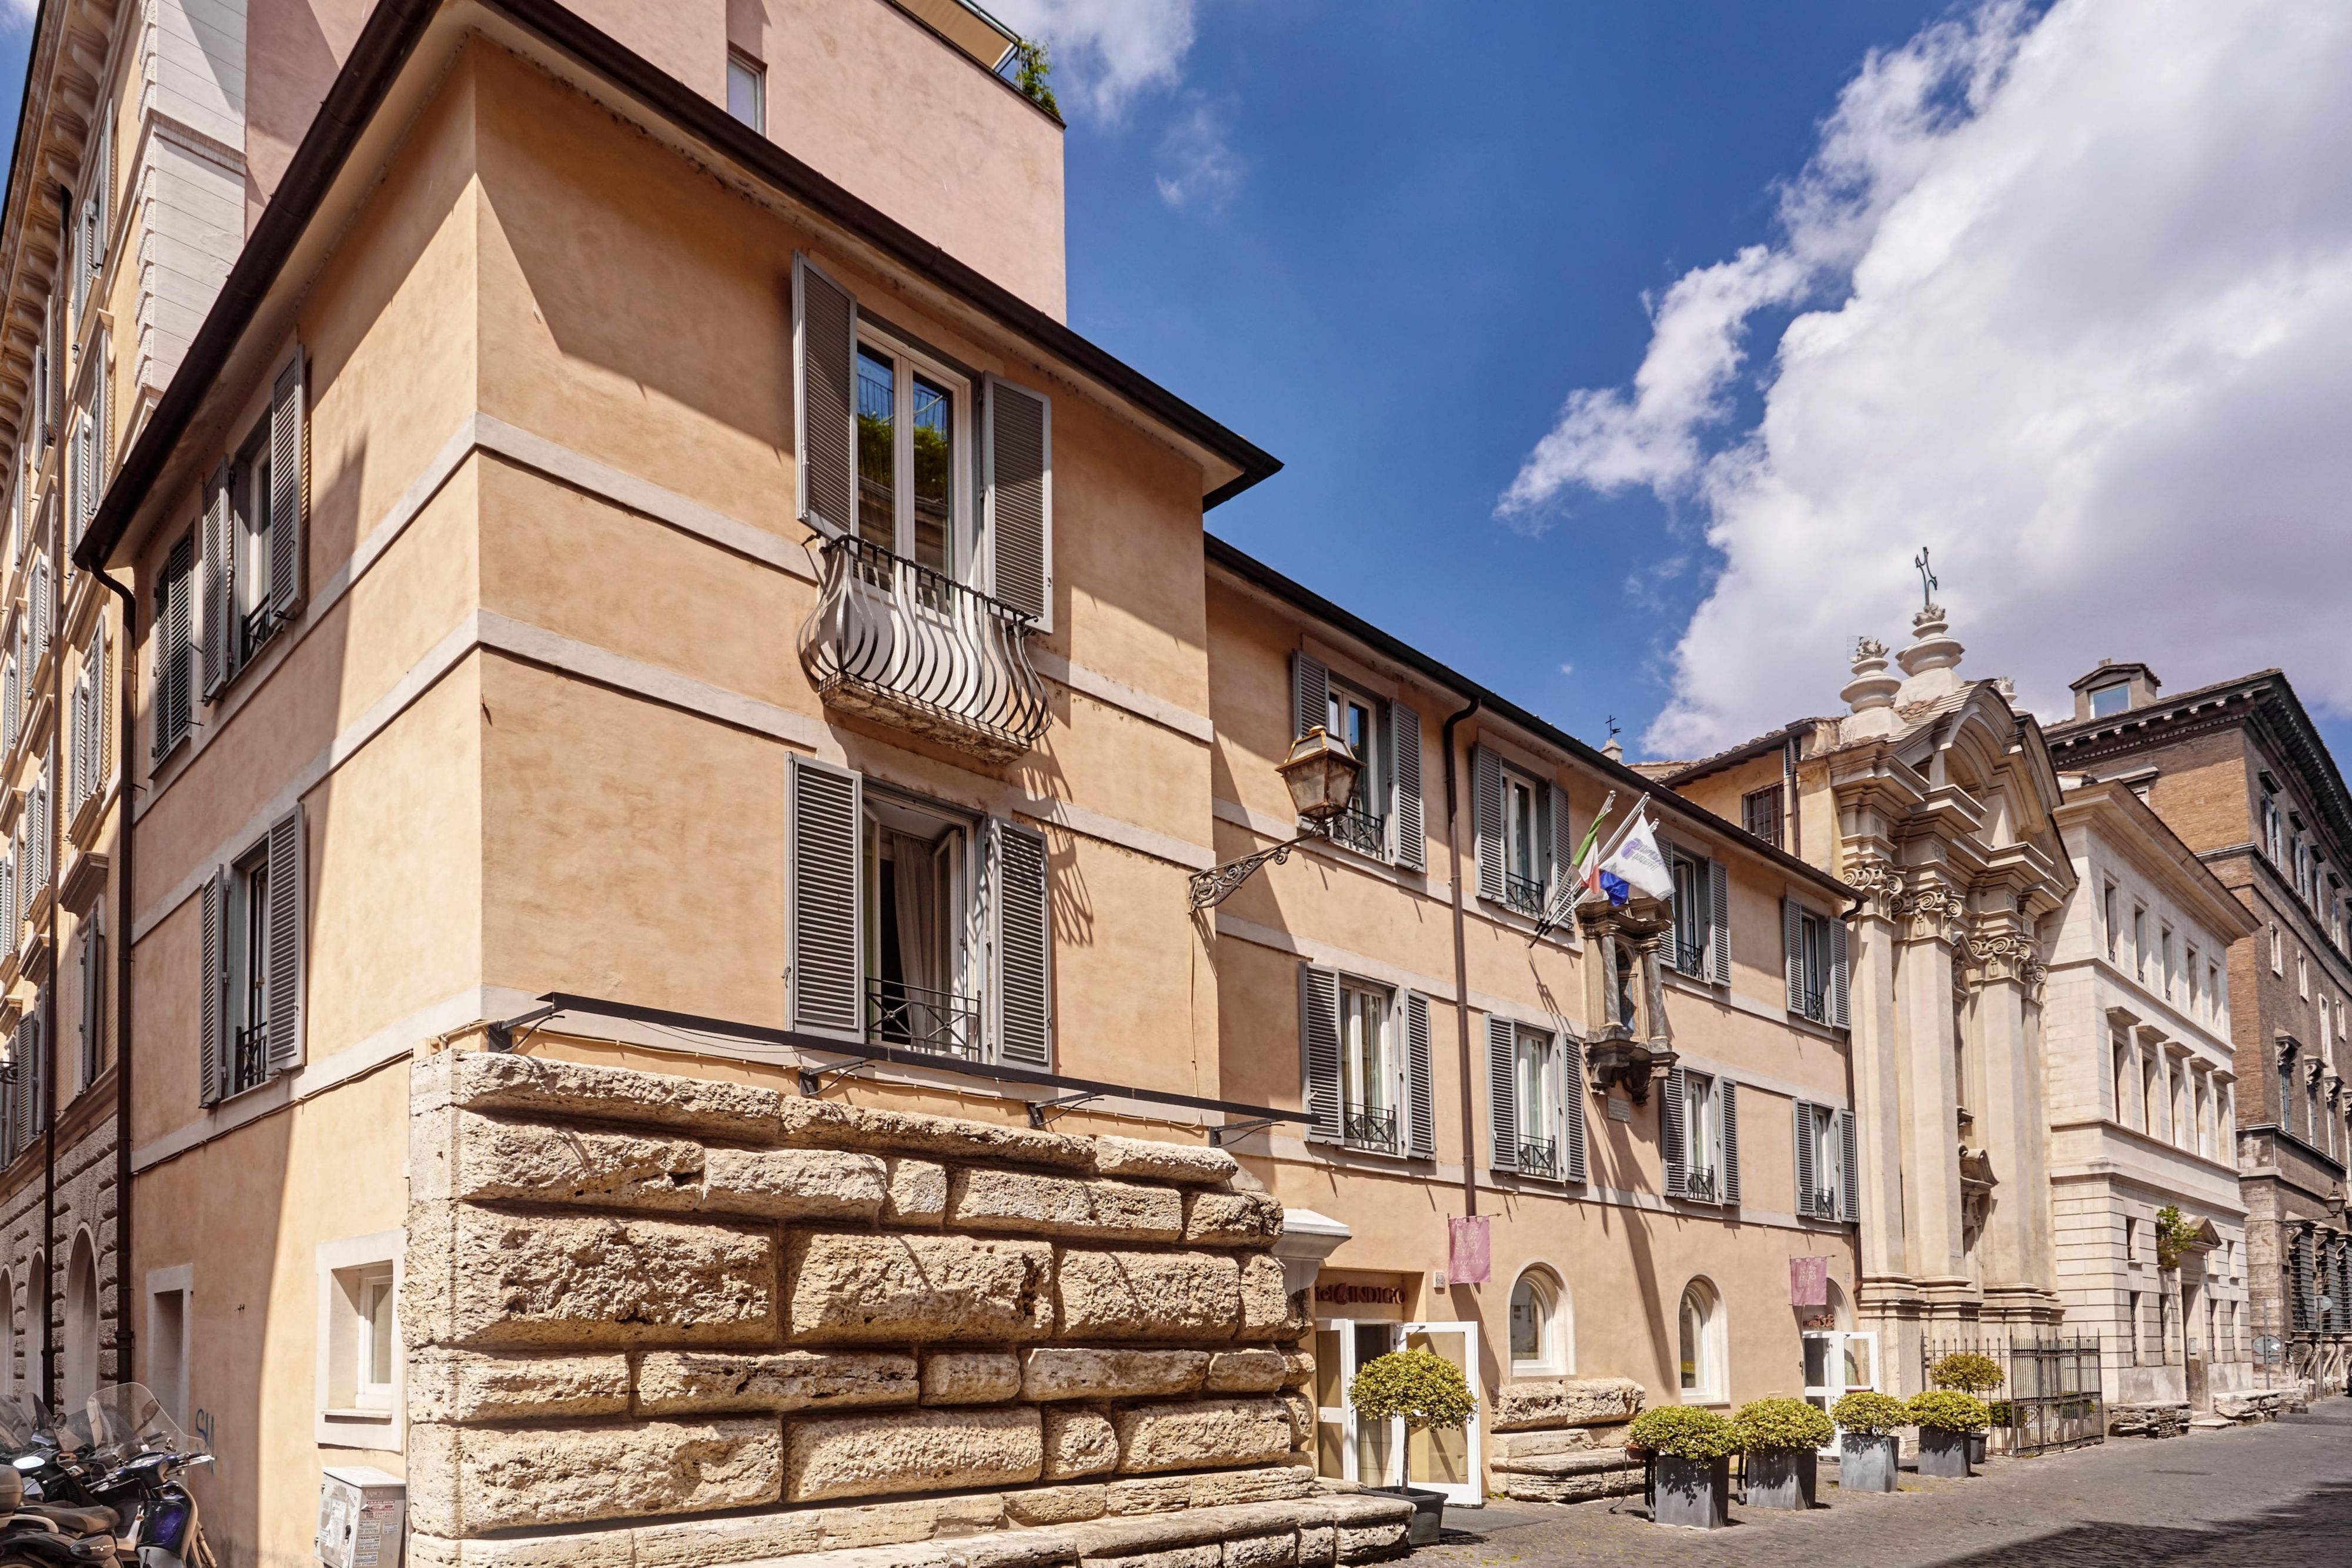 Our building was originally designed in the 16th century by Donato Bramante. An environment rich in charm and history, where Italian contemporary design is enclosed within ancient Roman walls. The modern interiors perfectly blend with important historical testimonies from ancient times.